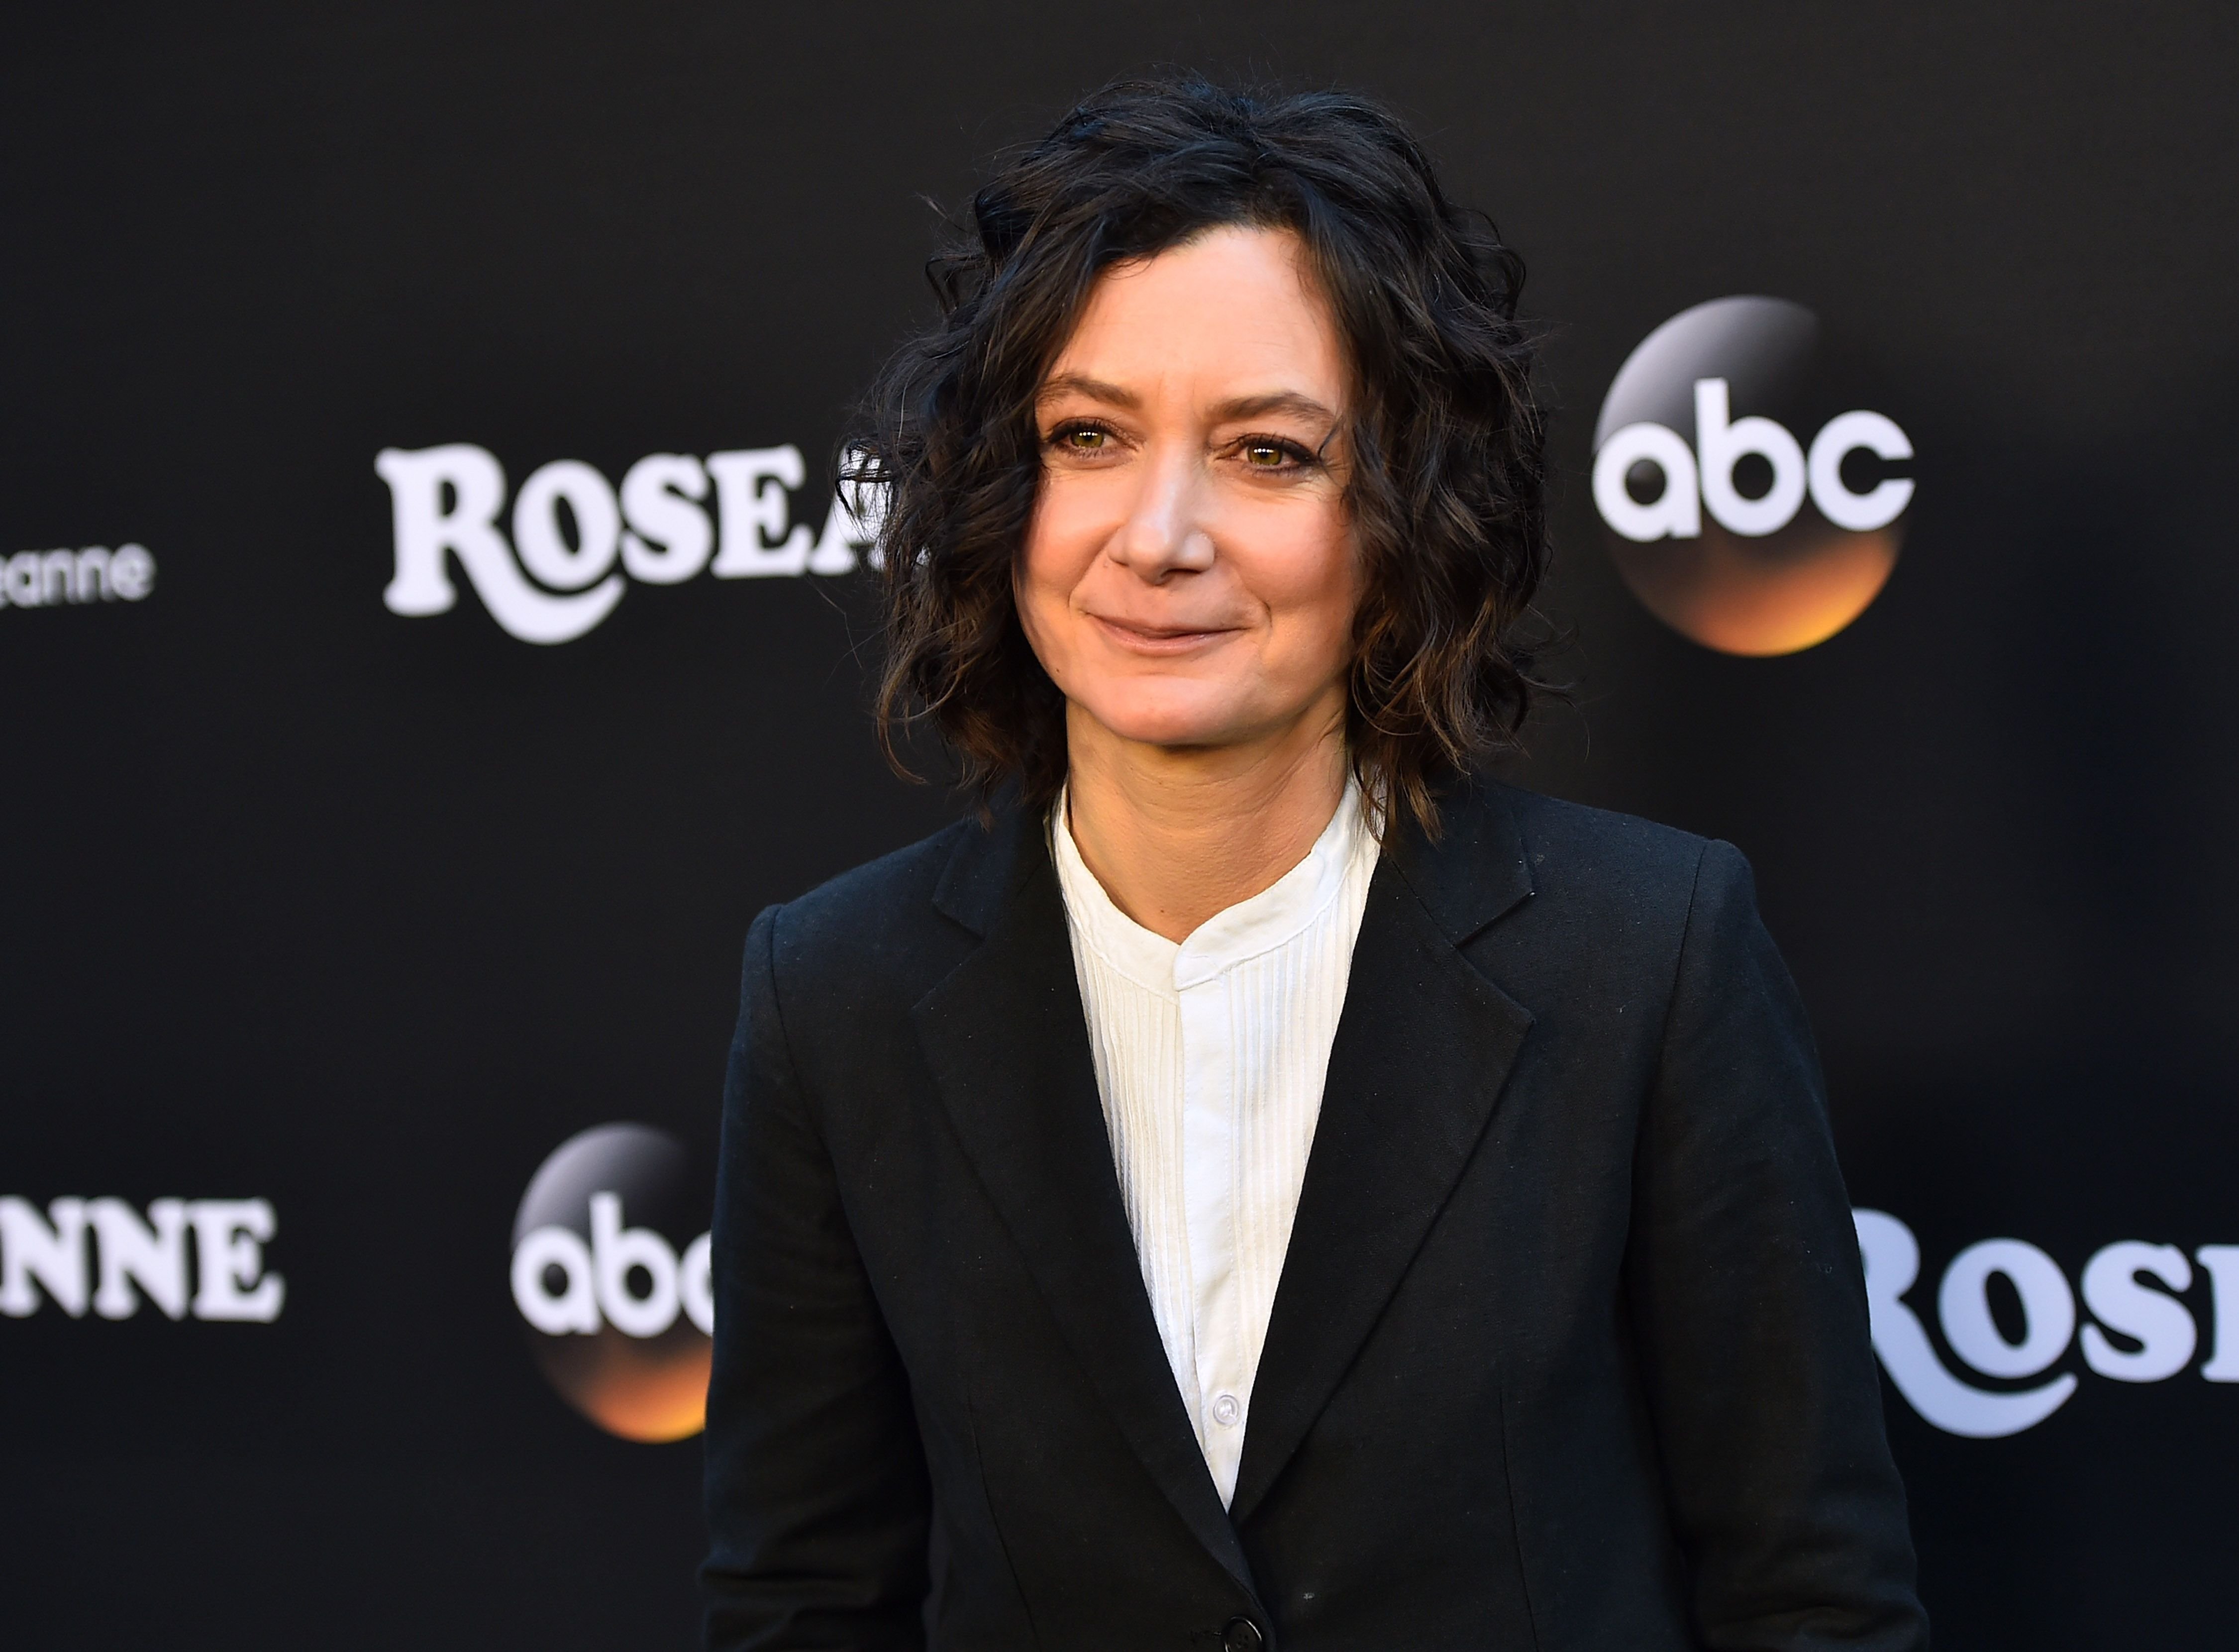 Sara Gilbert at the premiere of ABC's "Roseanne" at Walt Disney Studio Lot on March 23, 2018 | Photo: Getty Images